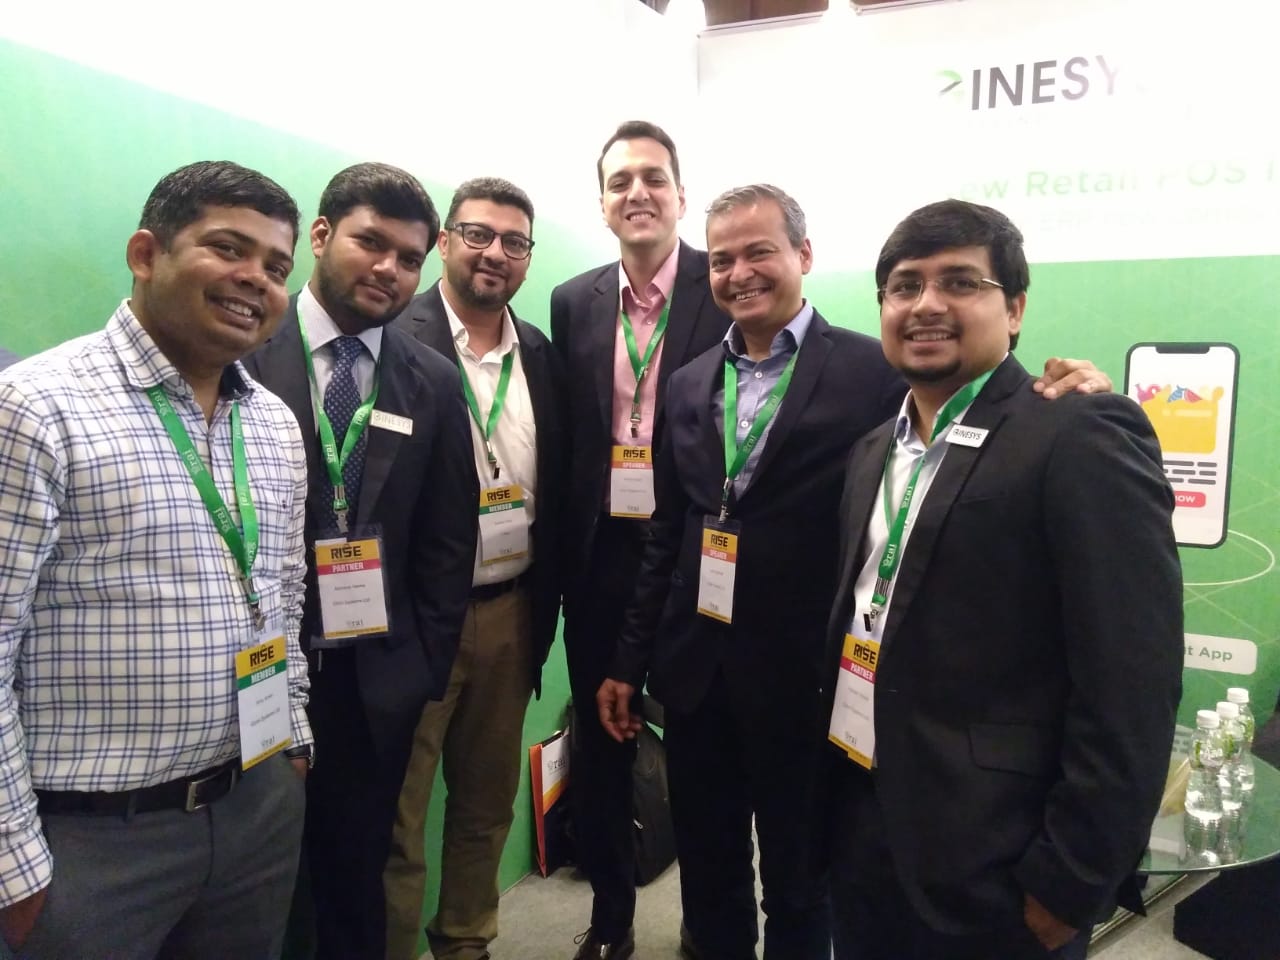 Ginesys showcases Zwing M-POS and Omnichannel Integration Platform at the Retail India Summit & Expo (RISE) 2018!